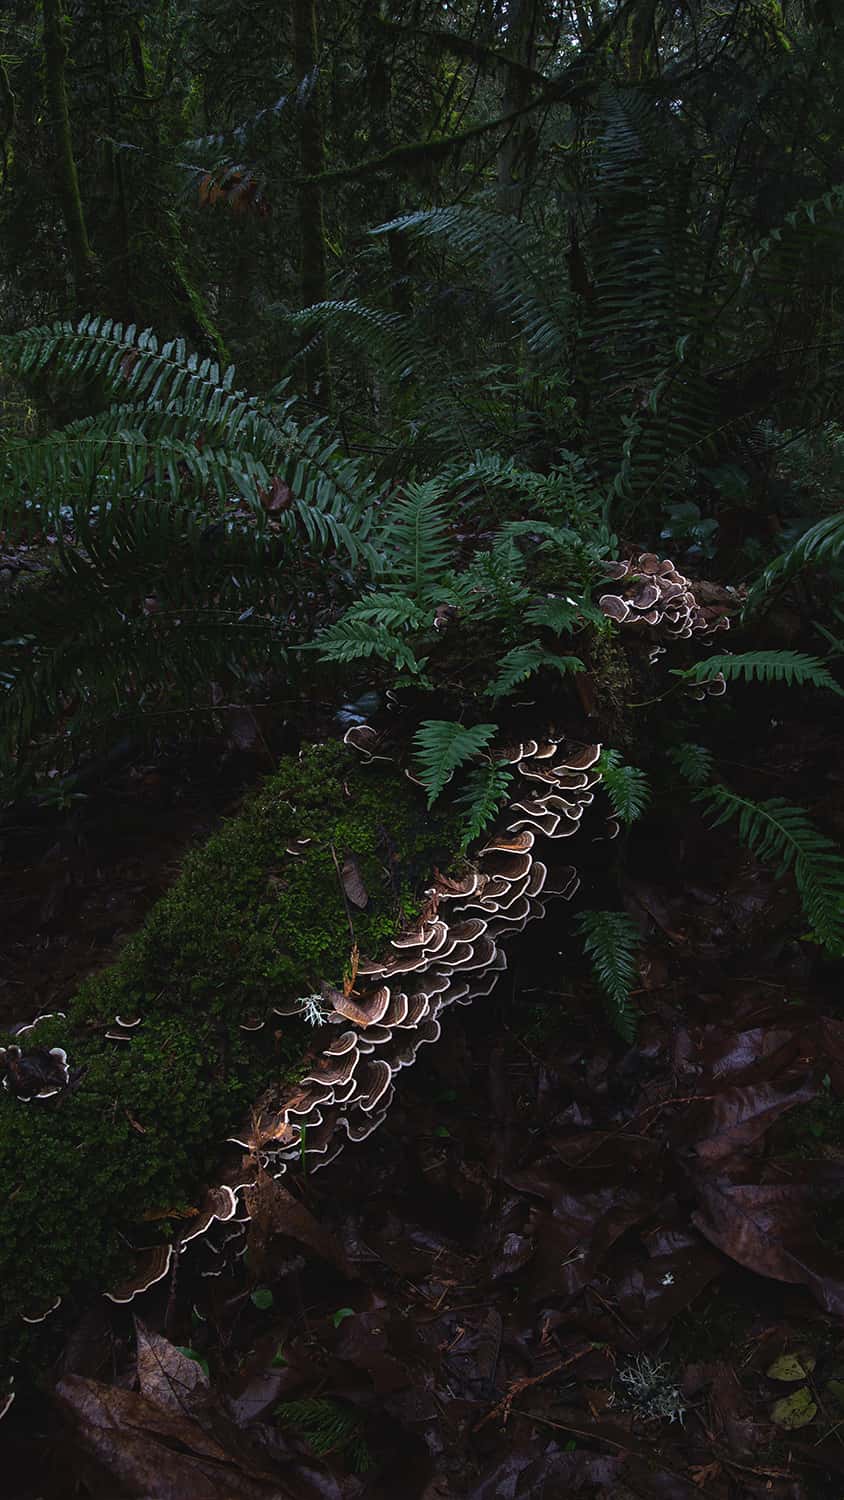 A Portland florist offers guide to identifying and harvesting Turkey Tail mushrooms in Portland Oregon forests